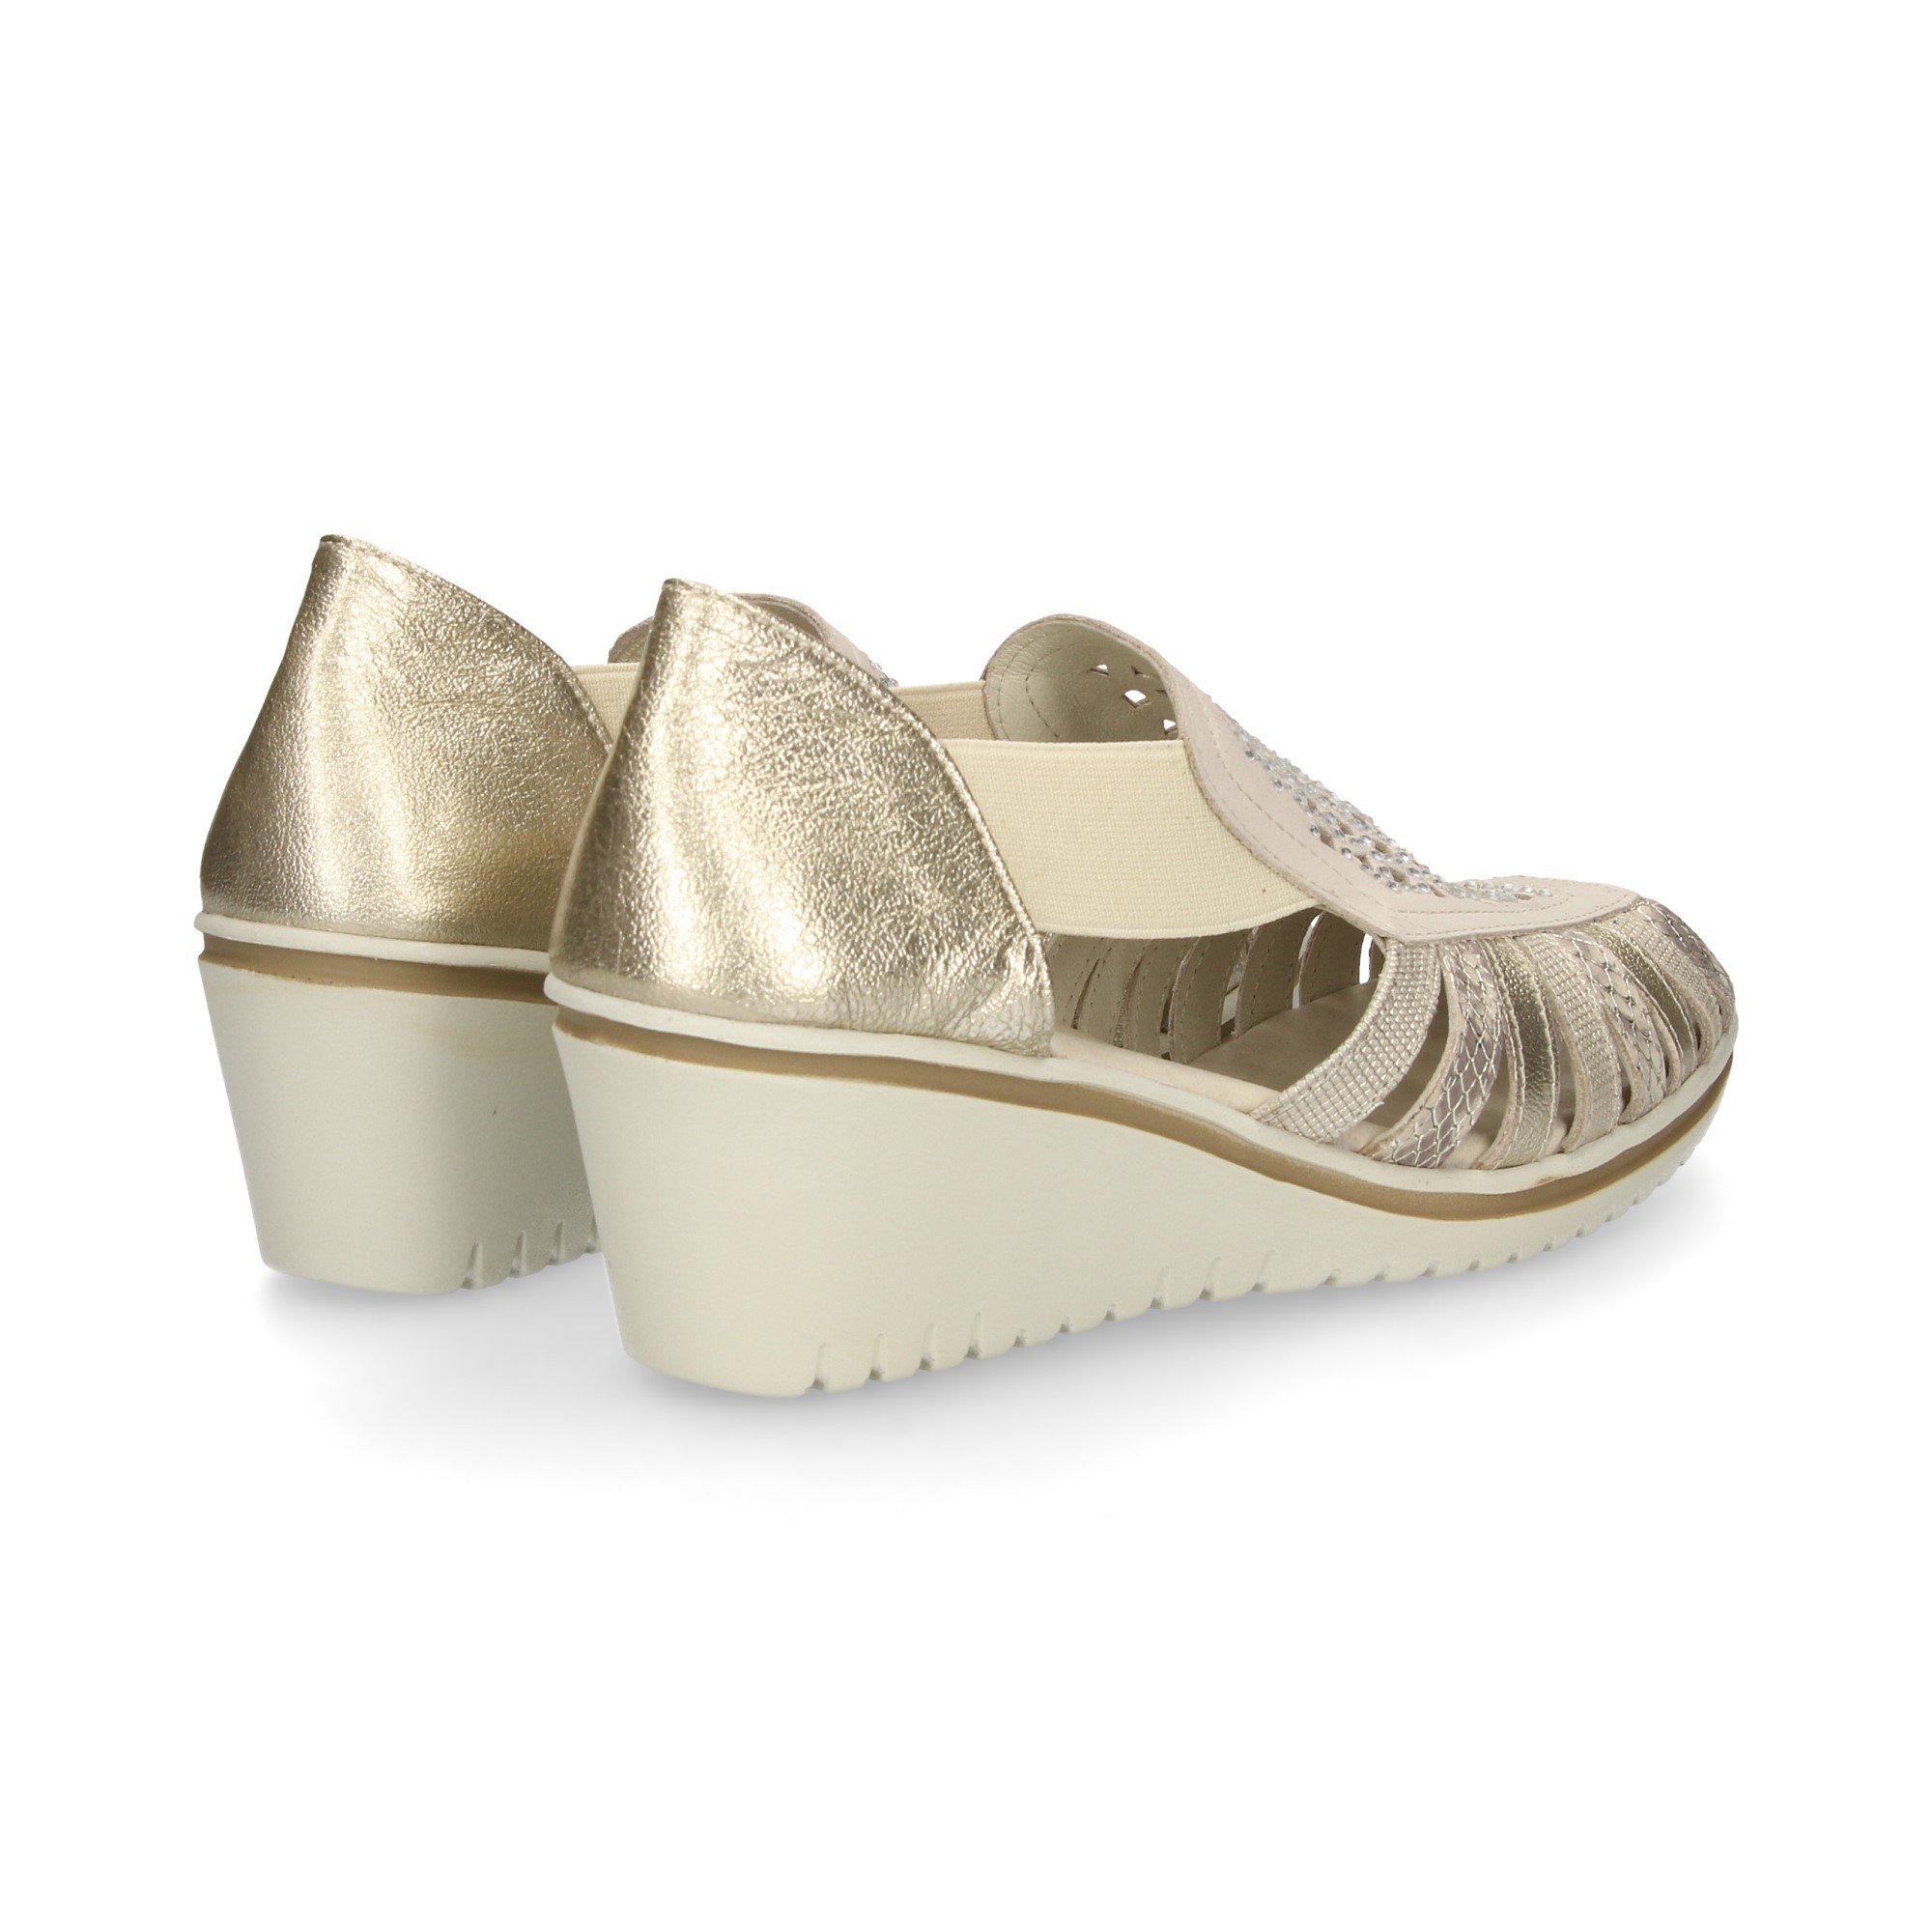 wedge-a-sides-instep-broth-strass-cream